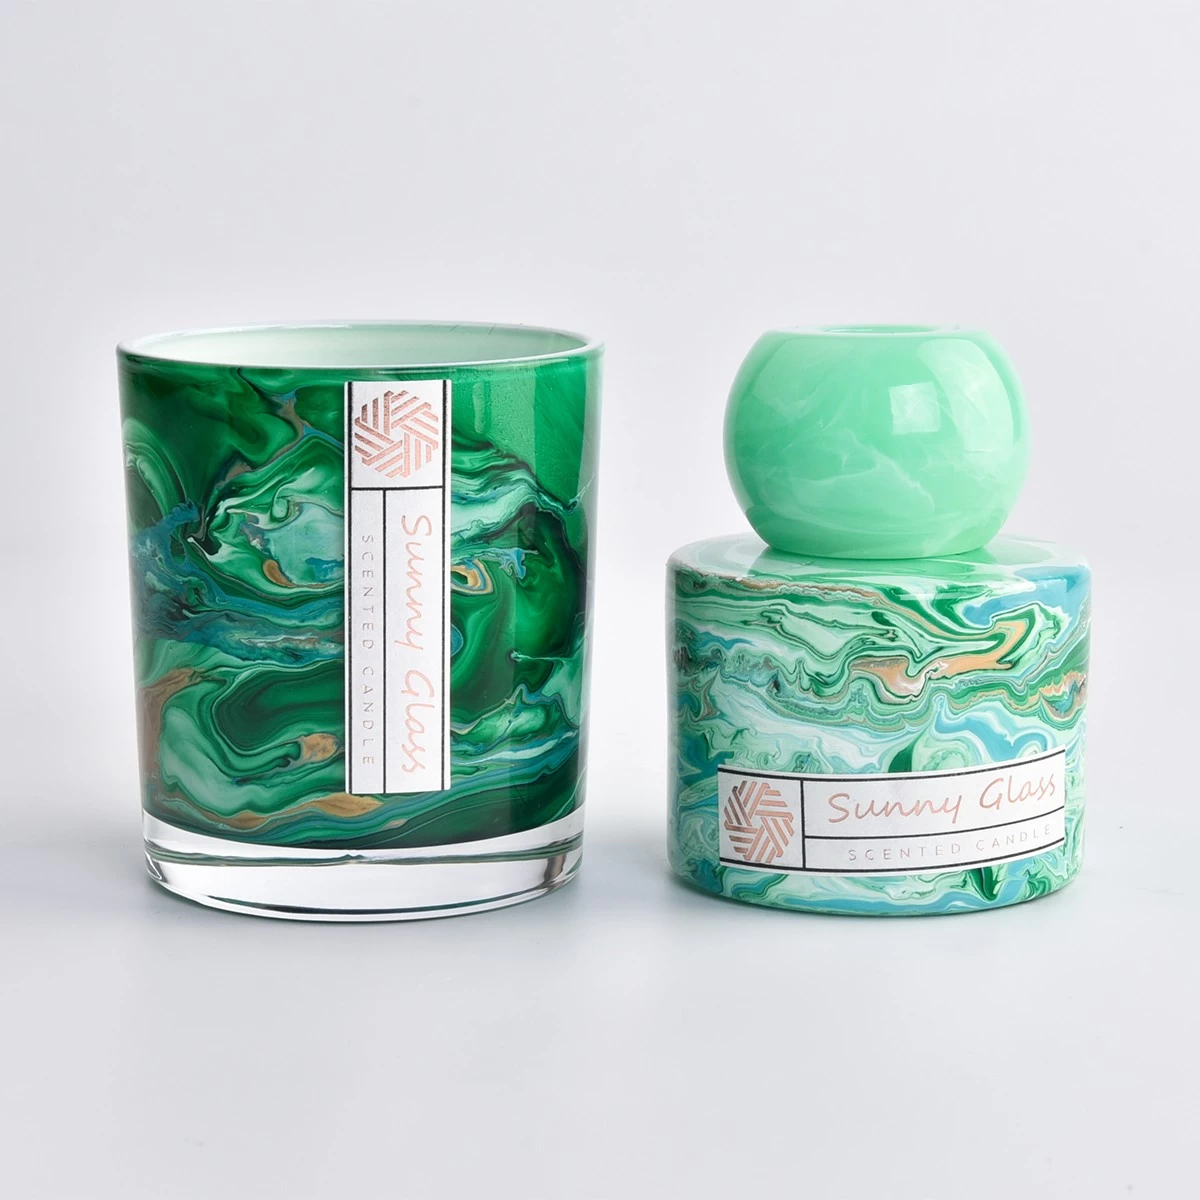 High quality marbled green glass candle jar and reed diffuser bottle suit for home decor